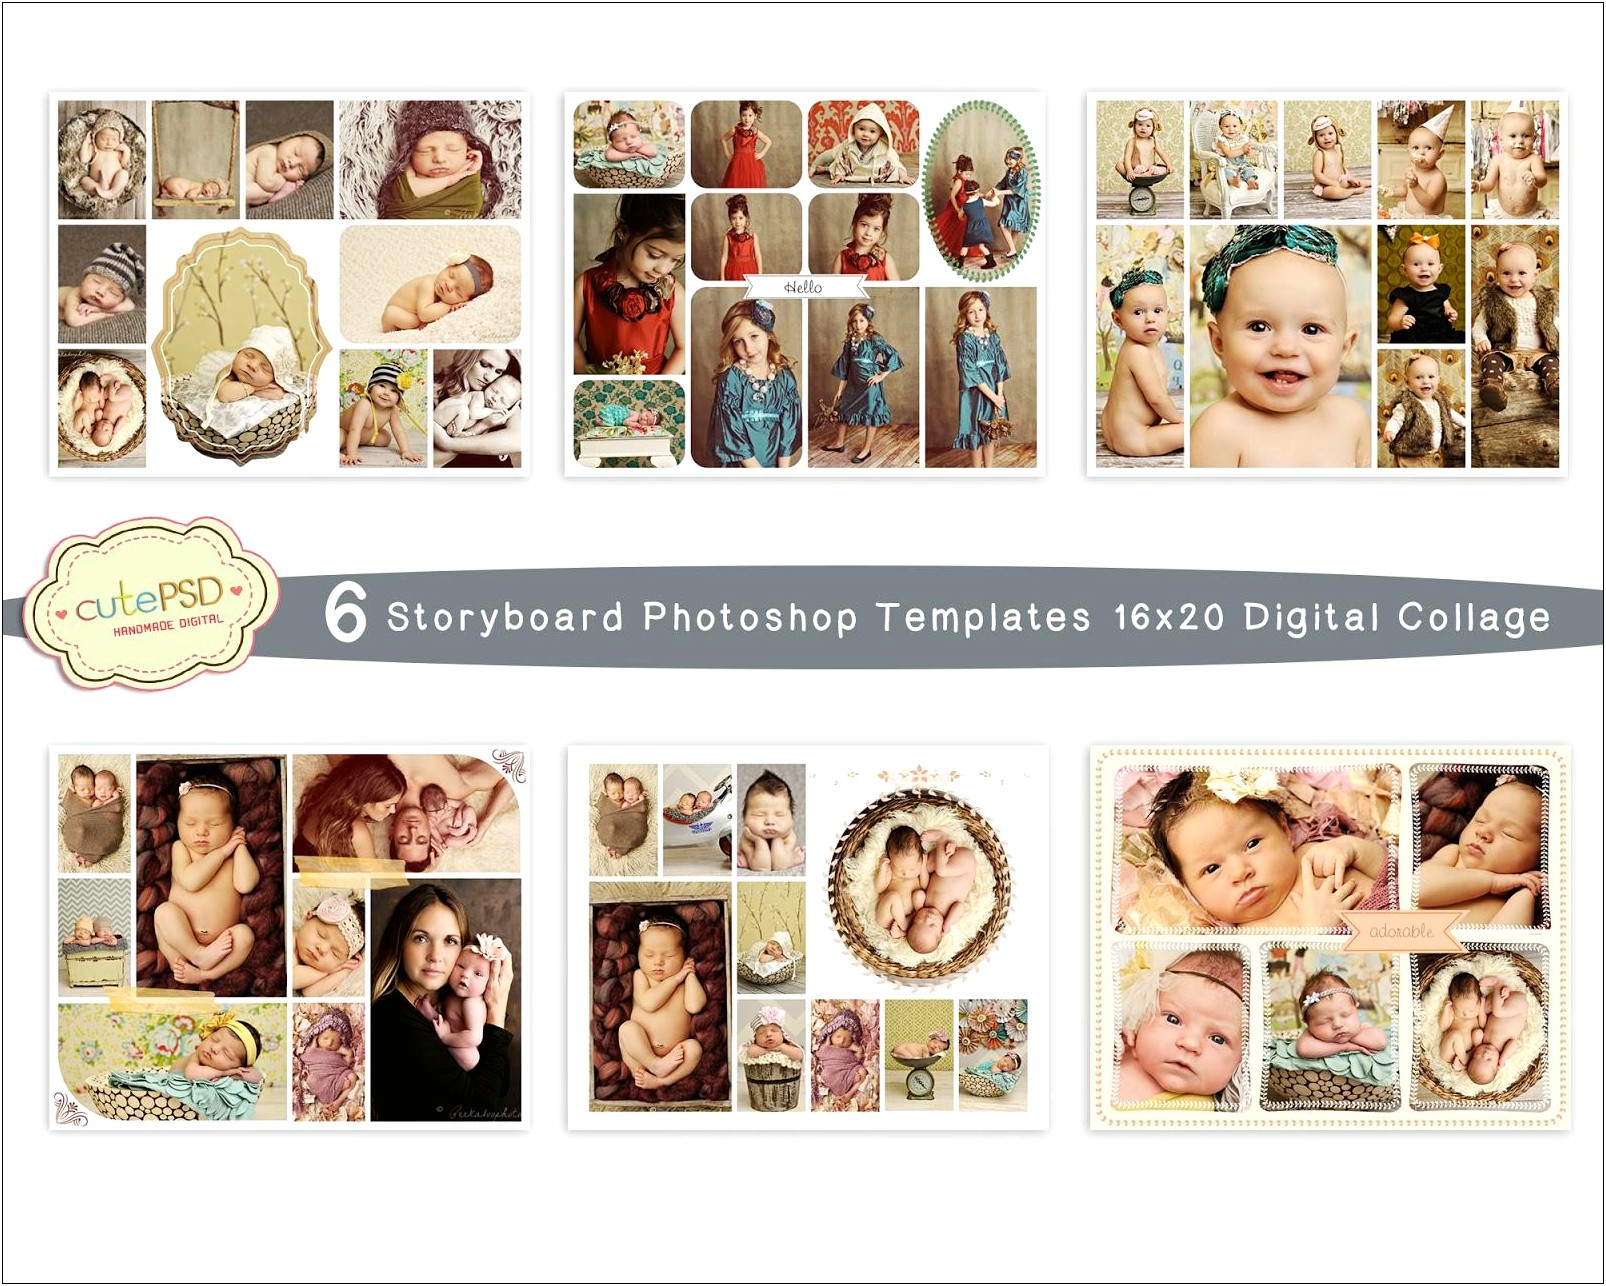 Free Photoshop Storyboard Templates For Photographers